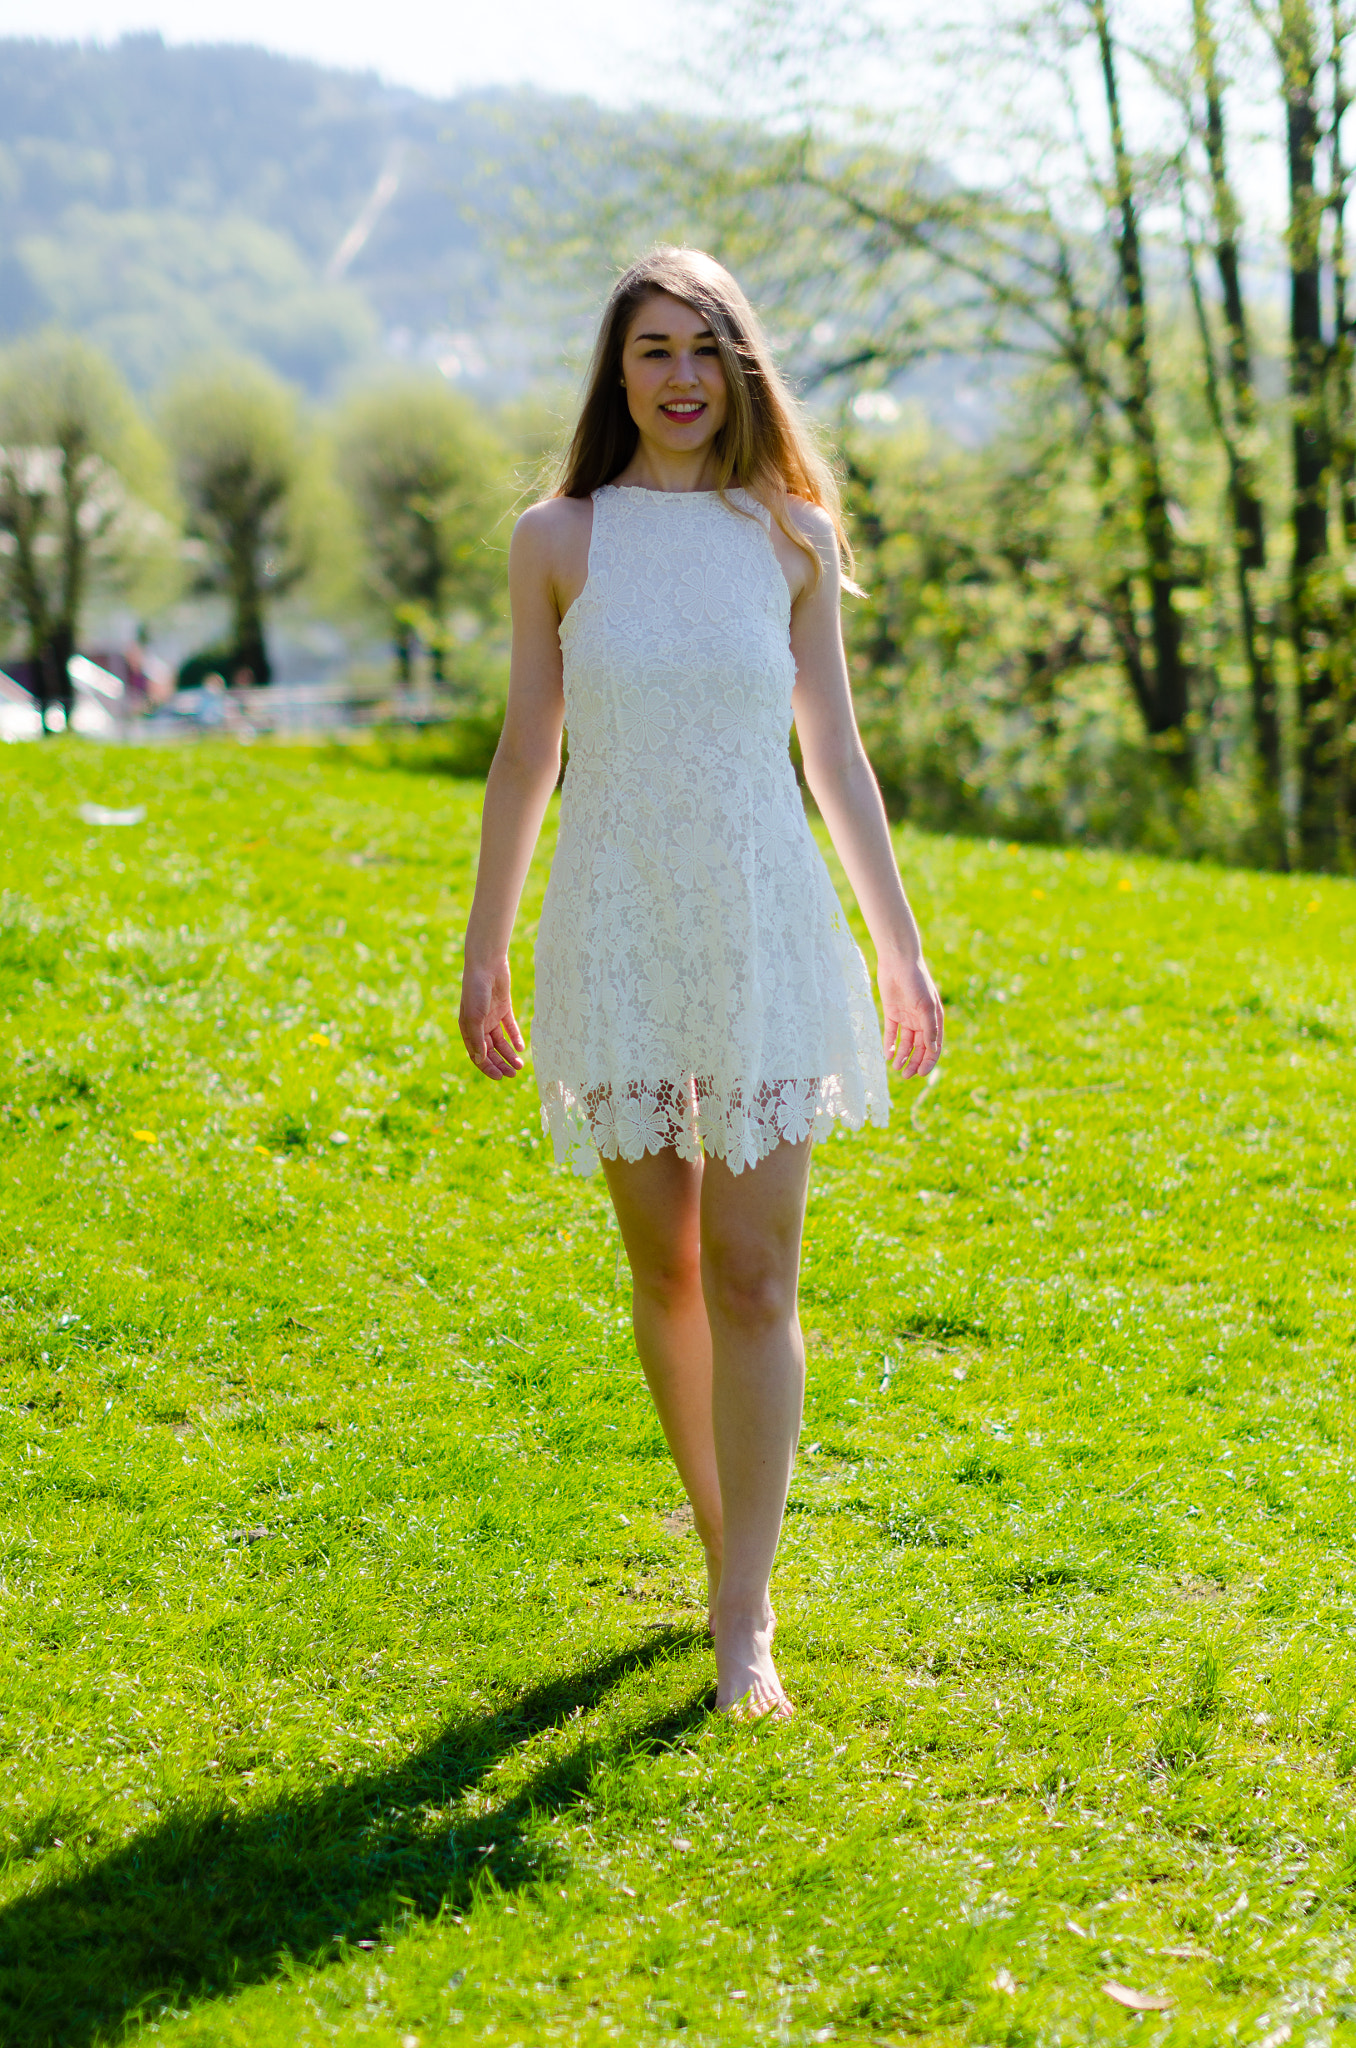 Nikon D7000 sample photo. Beautiful girl in white dress in the park photography